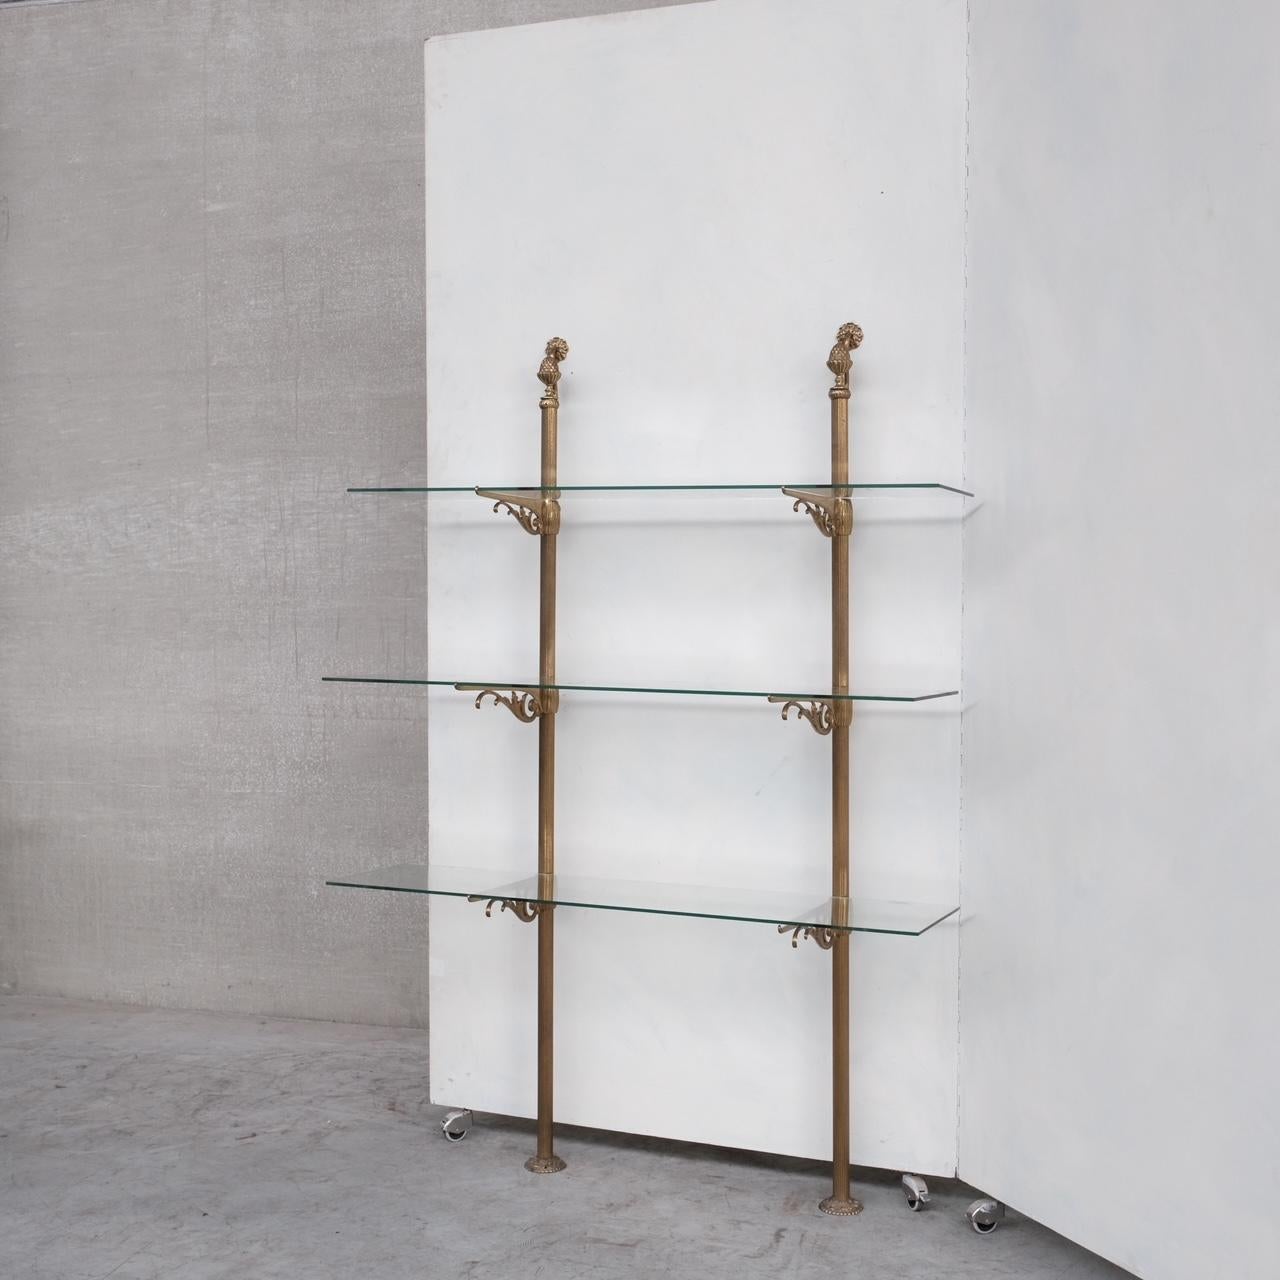 A three tiered shelf set. 

Brass and glass. 

France, c1920s. 

Ideal for bathroom, lounge or retail setting. 

Good condition, some scuffs or wear commensurate with age. 

Location: Belgium Gallery. 

Dimensions: 155 H x 31 D x 110 W